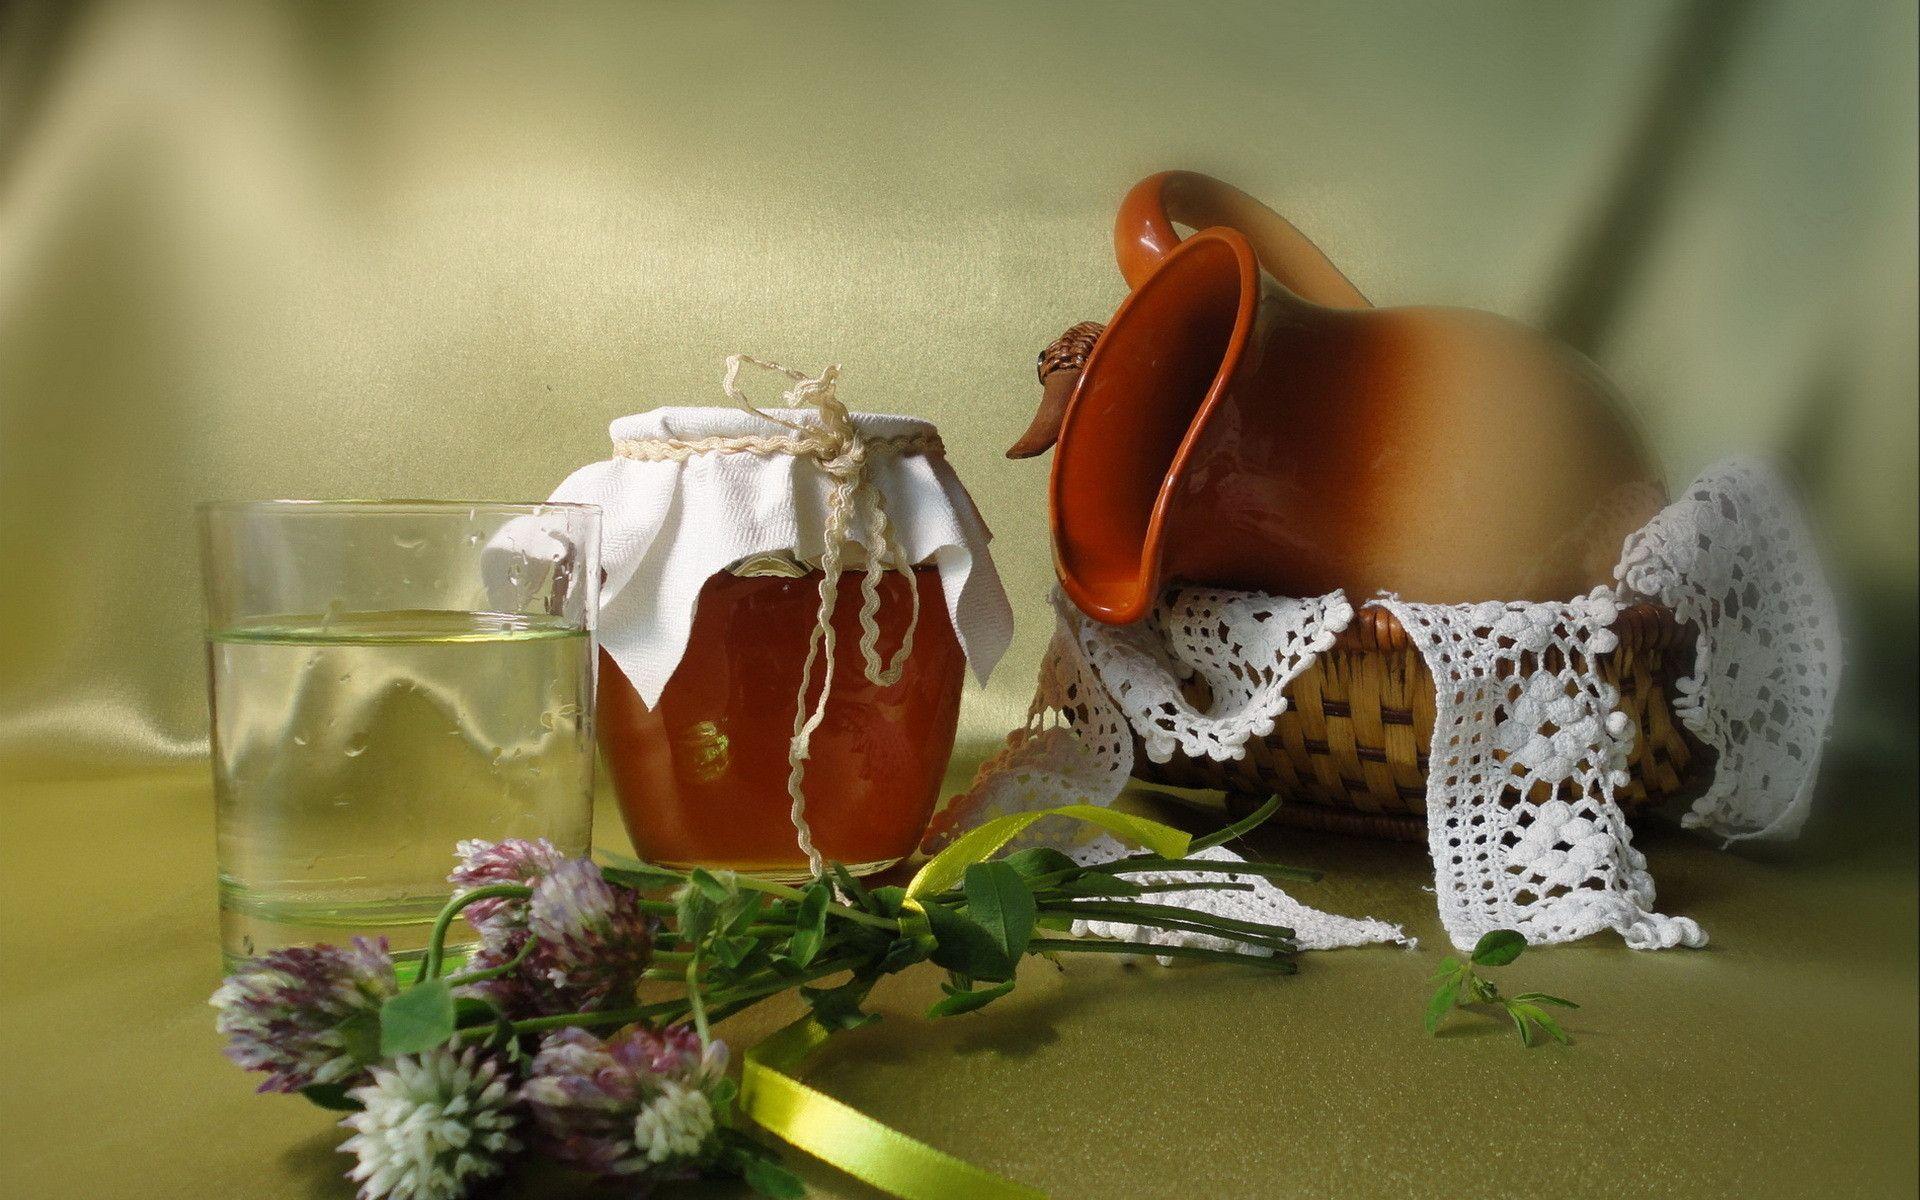 honey Still Life wallpaper and image, picture, photo